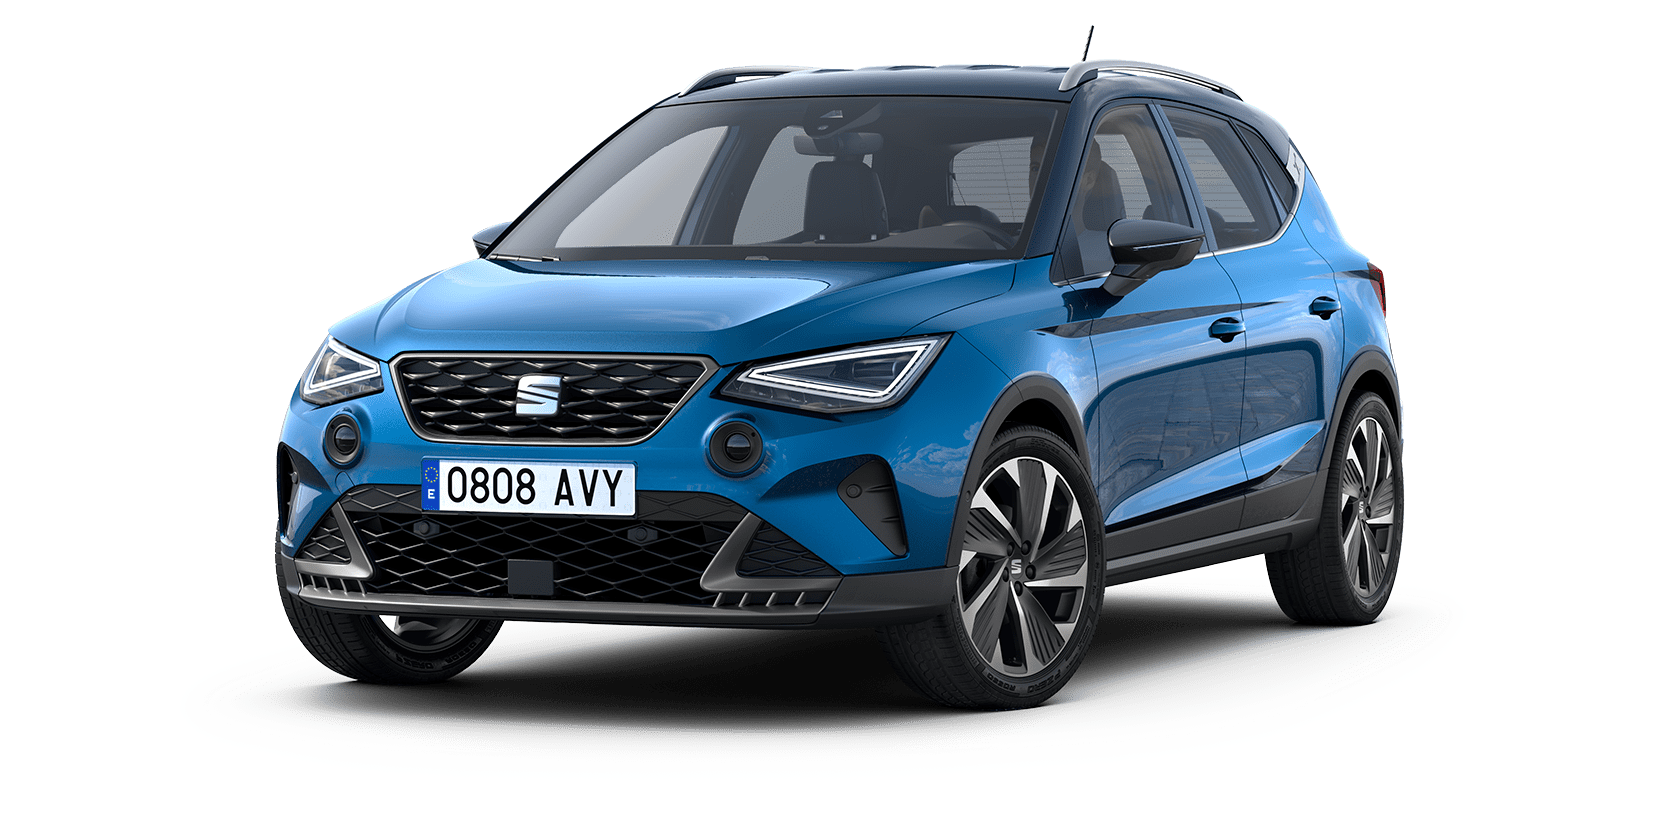 SEAT Arona FR Sapphire Blue colour with performance machined alloy wheels